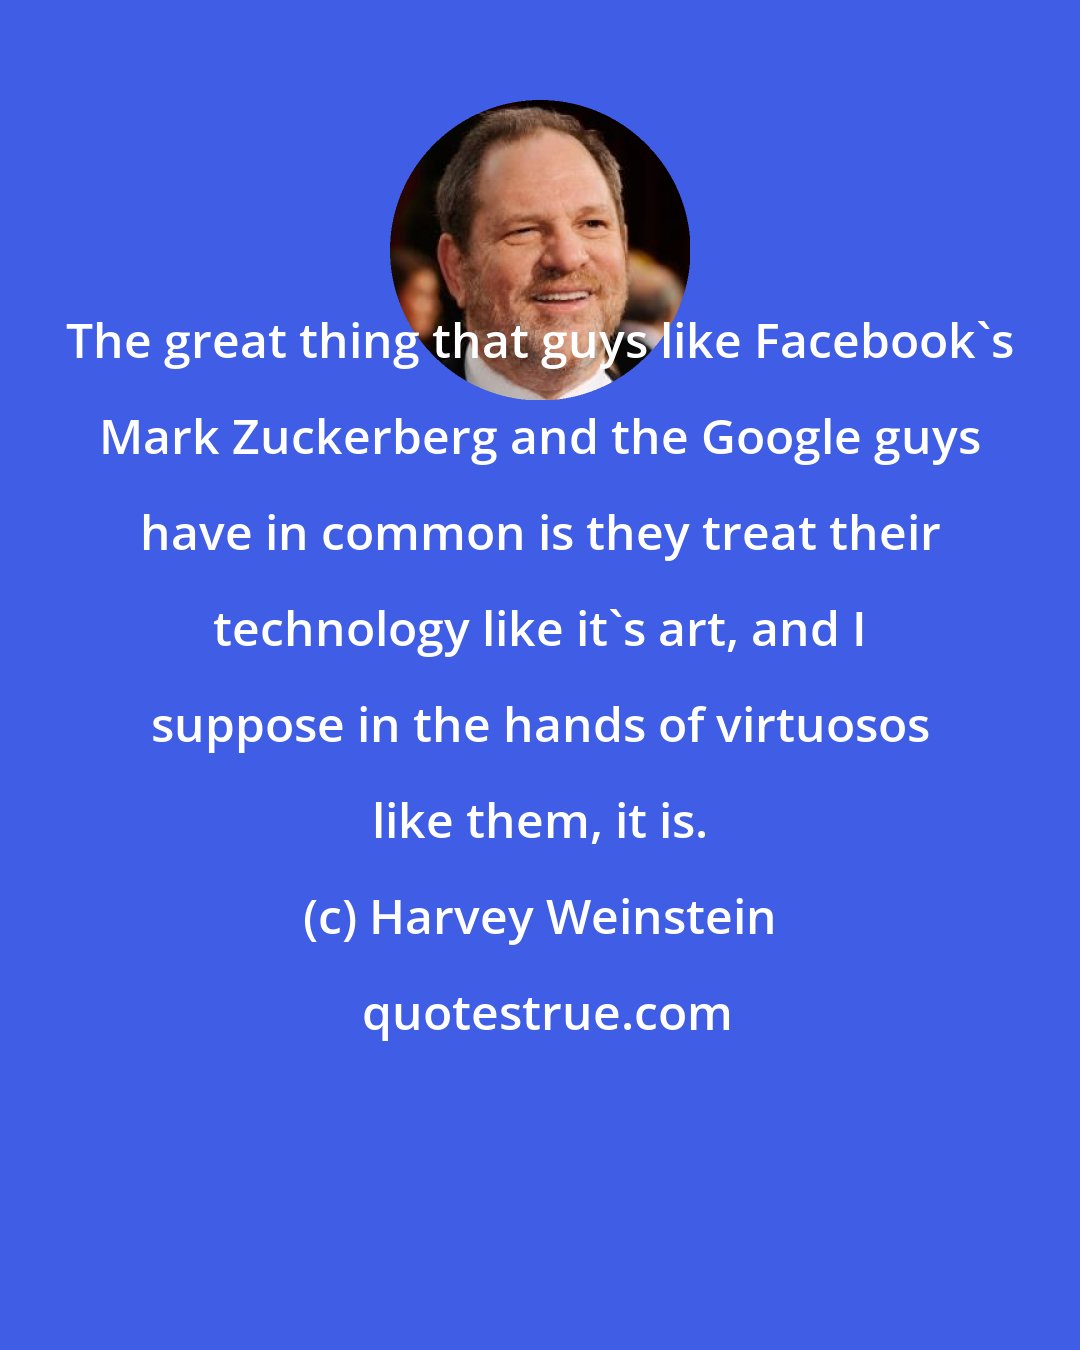 Harvey Weinstein: The great thing that guys like Facebook's Mark Zuckerberg and the Google guys have in common is they treat their technology like it's art, and I suppose in the hands of virtuosos like them, it is.